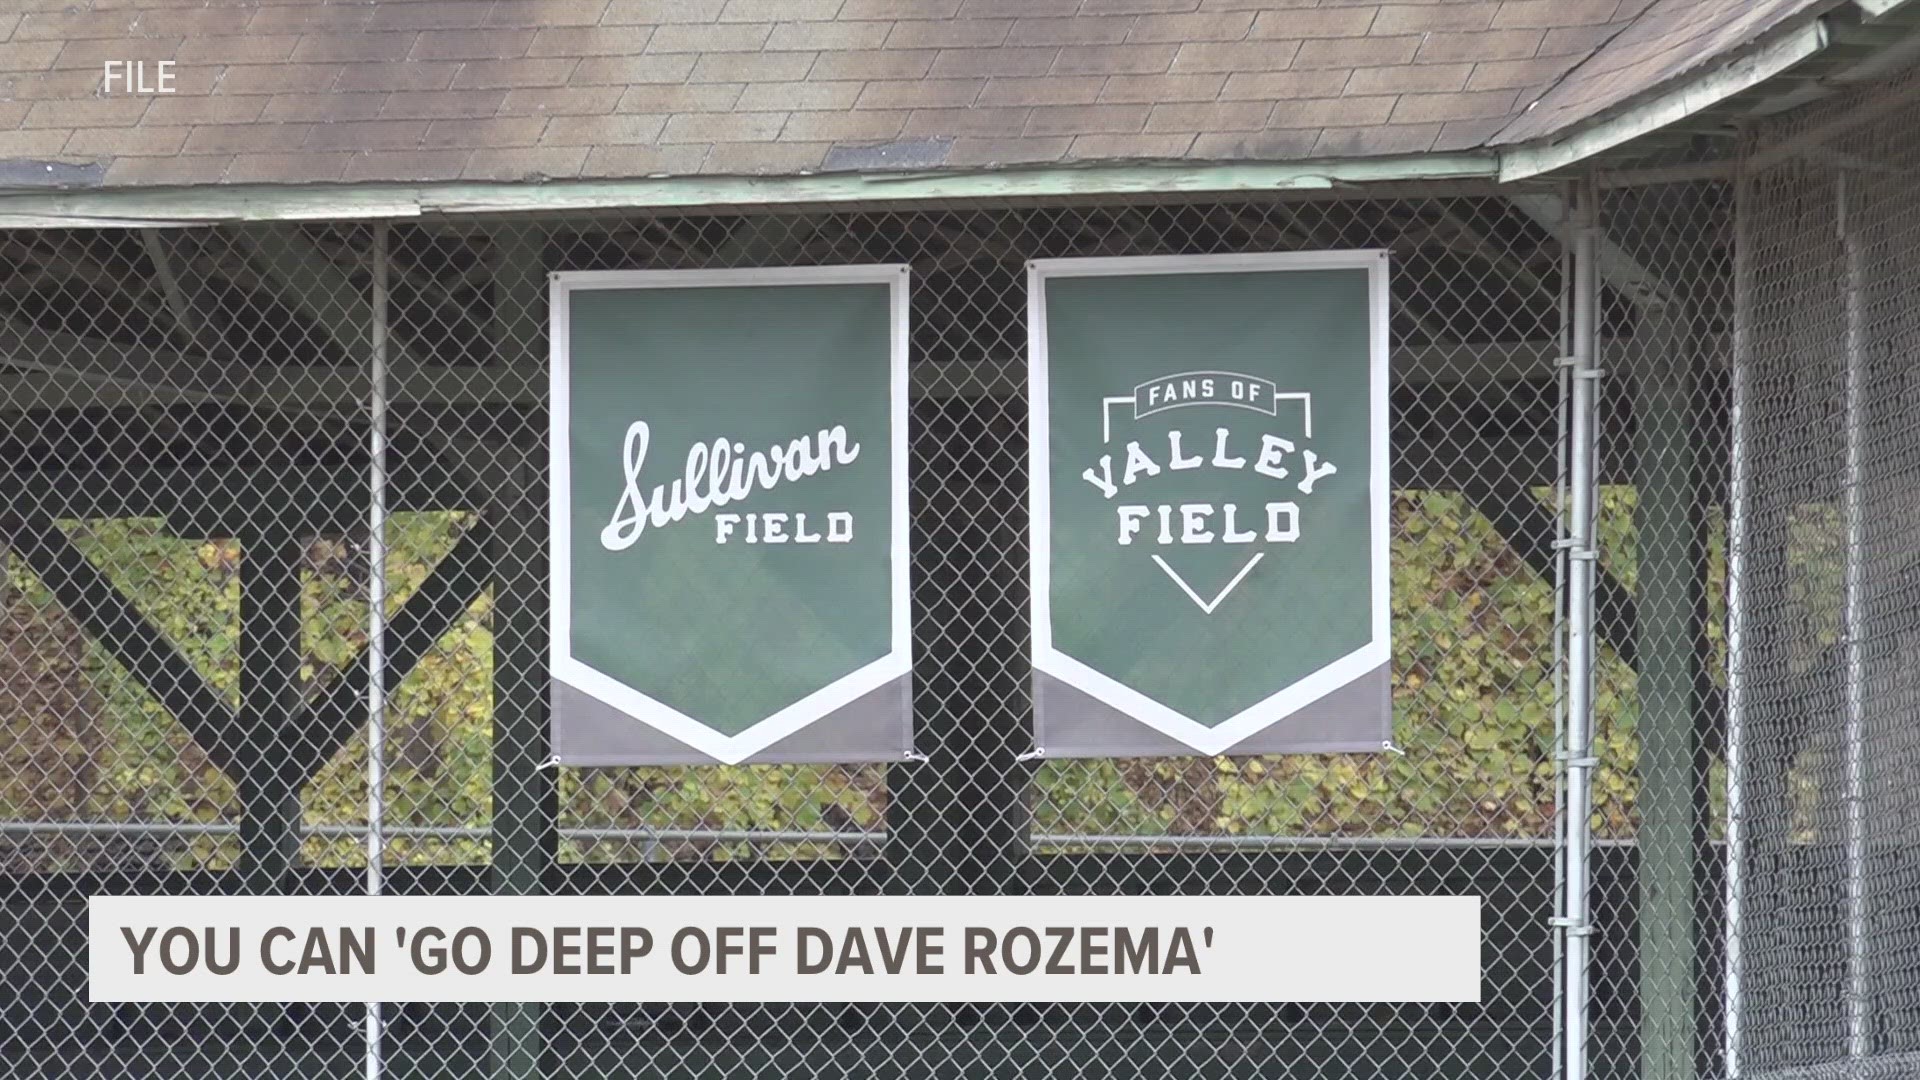 Grand Rapids native Dave Rozema is joining the effort to save a historic baseball field that he once played at as a teenager.